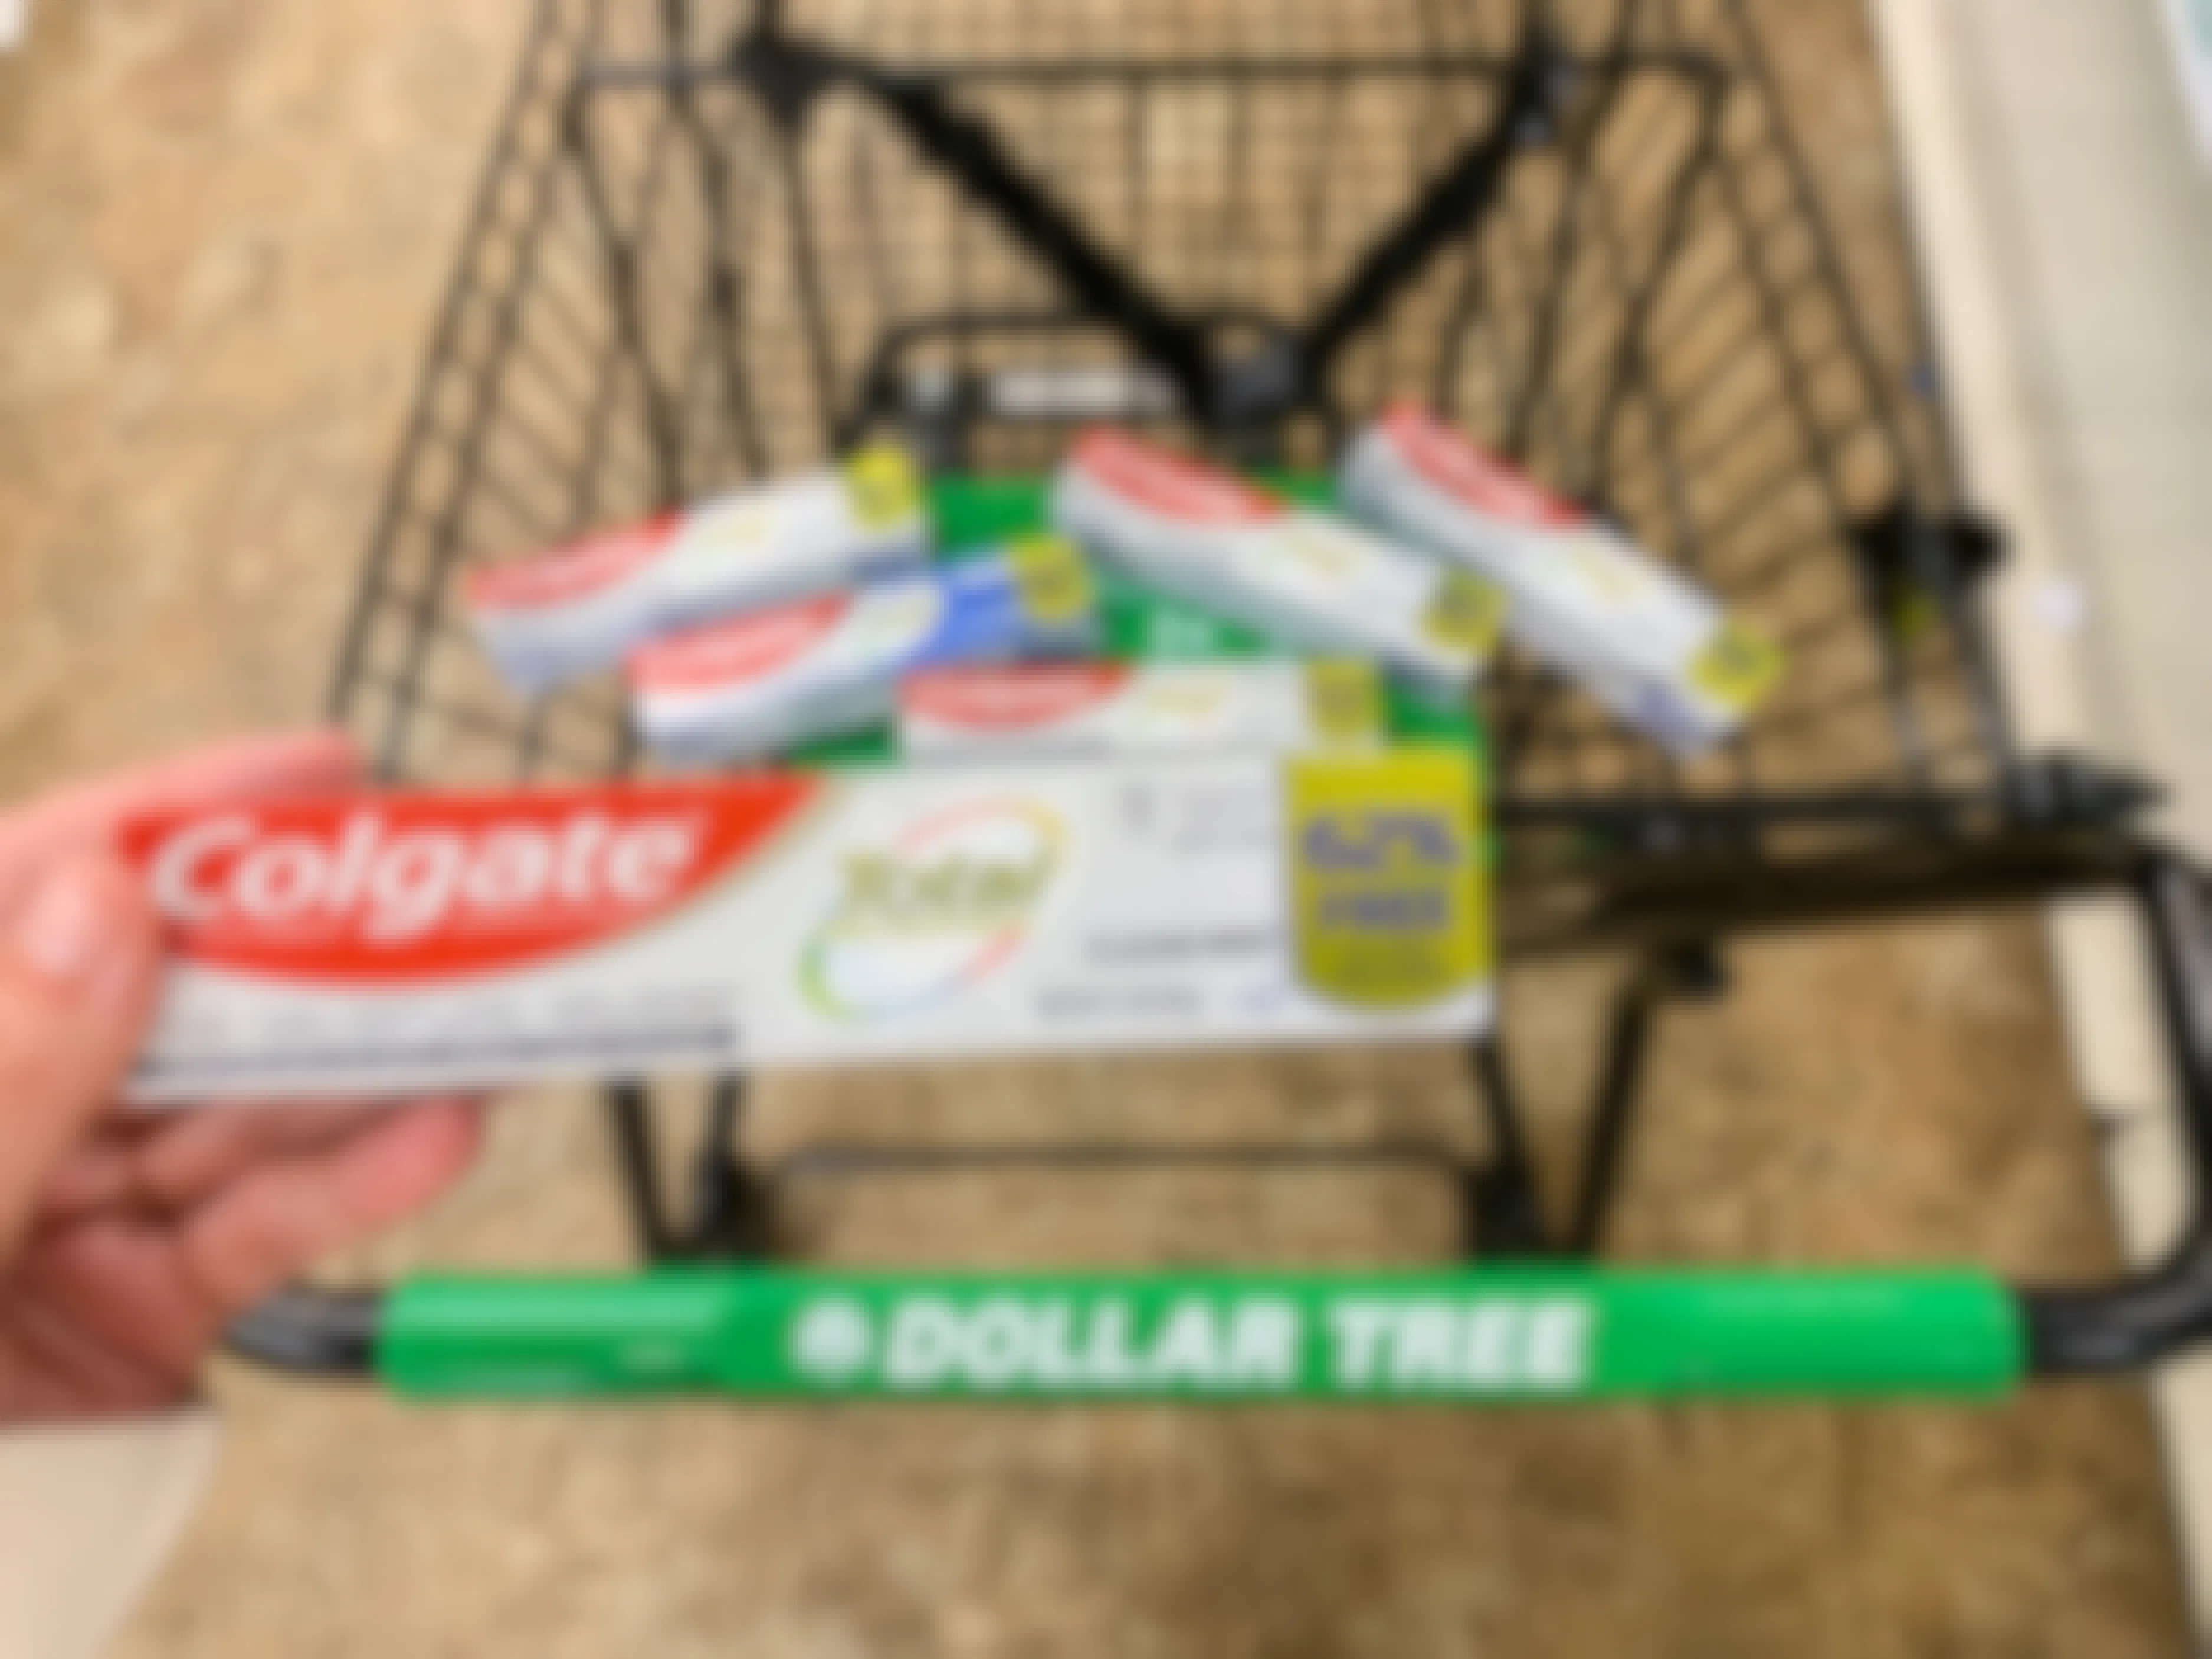 a person holding colgate toothpaste at the dollar store